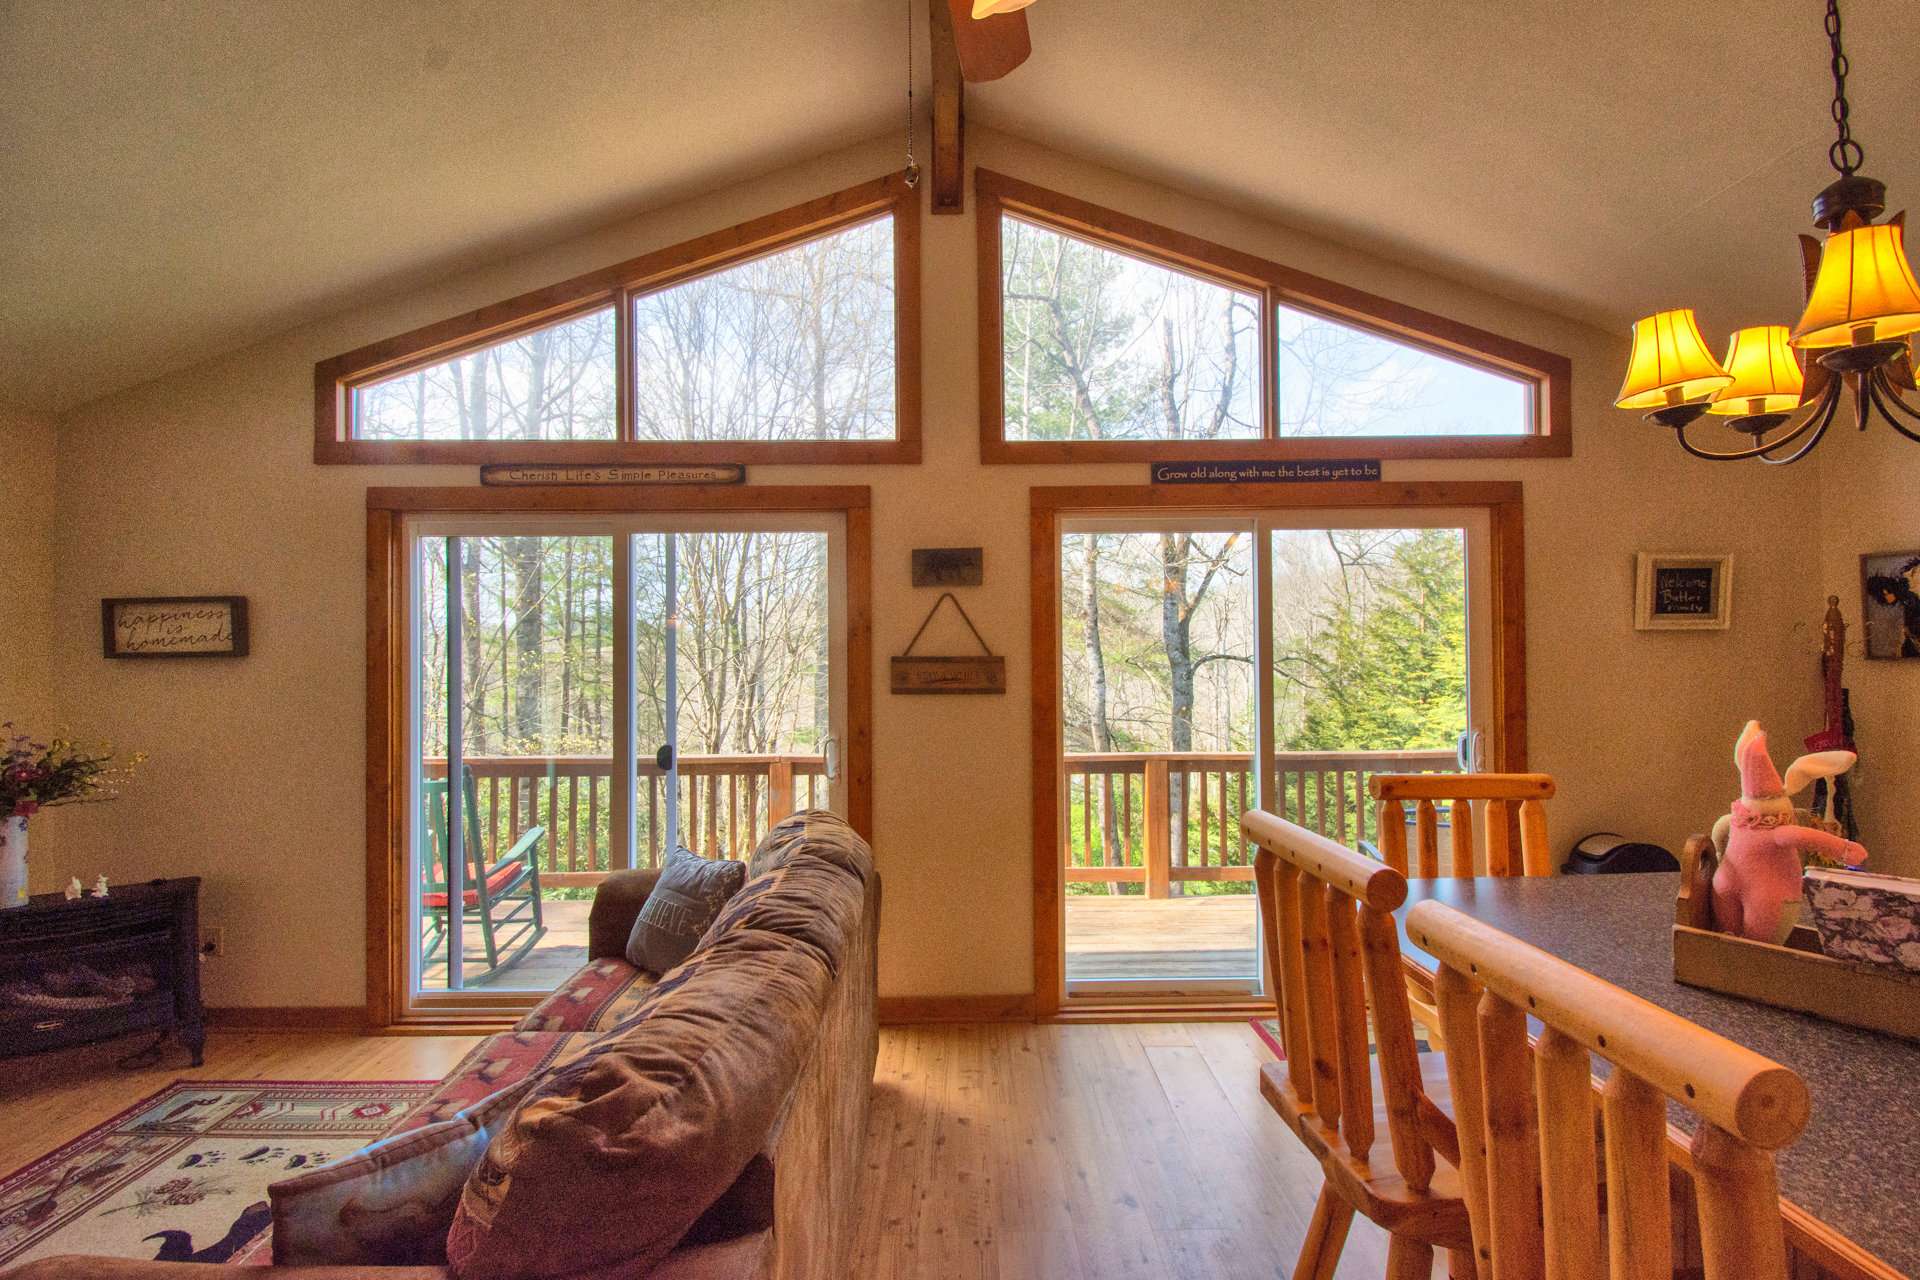 Relax inside with the views of outdoor scenery throughout all four seasons in the North Carolina Mountians.